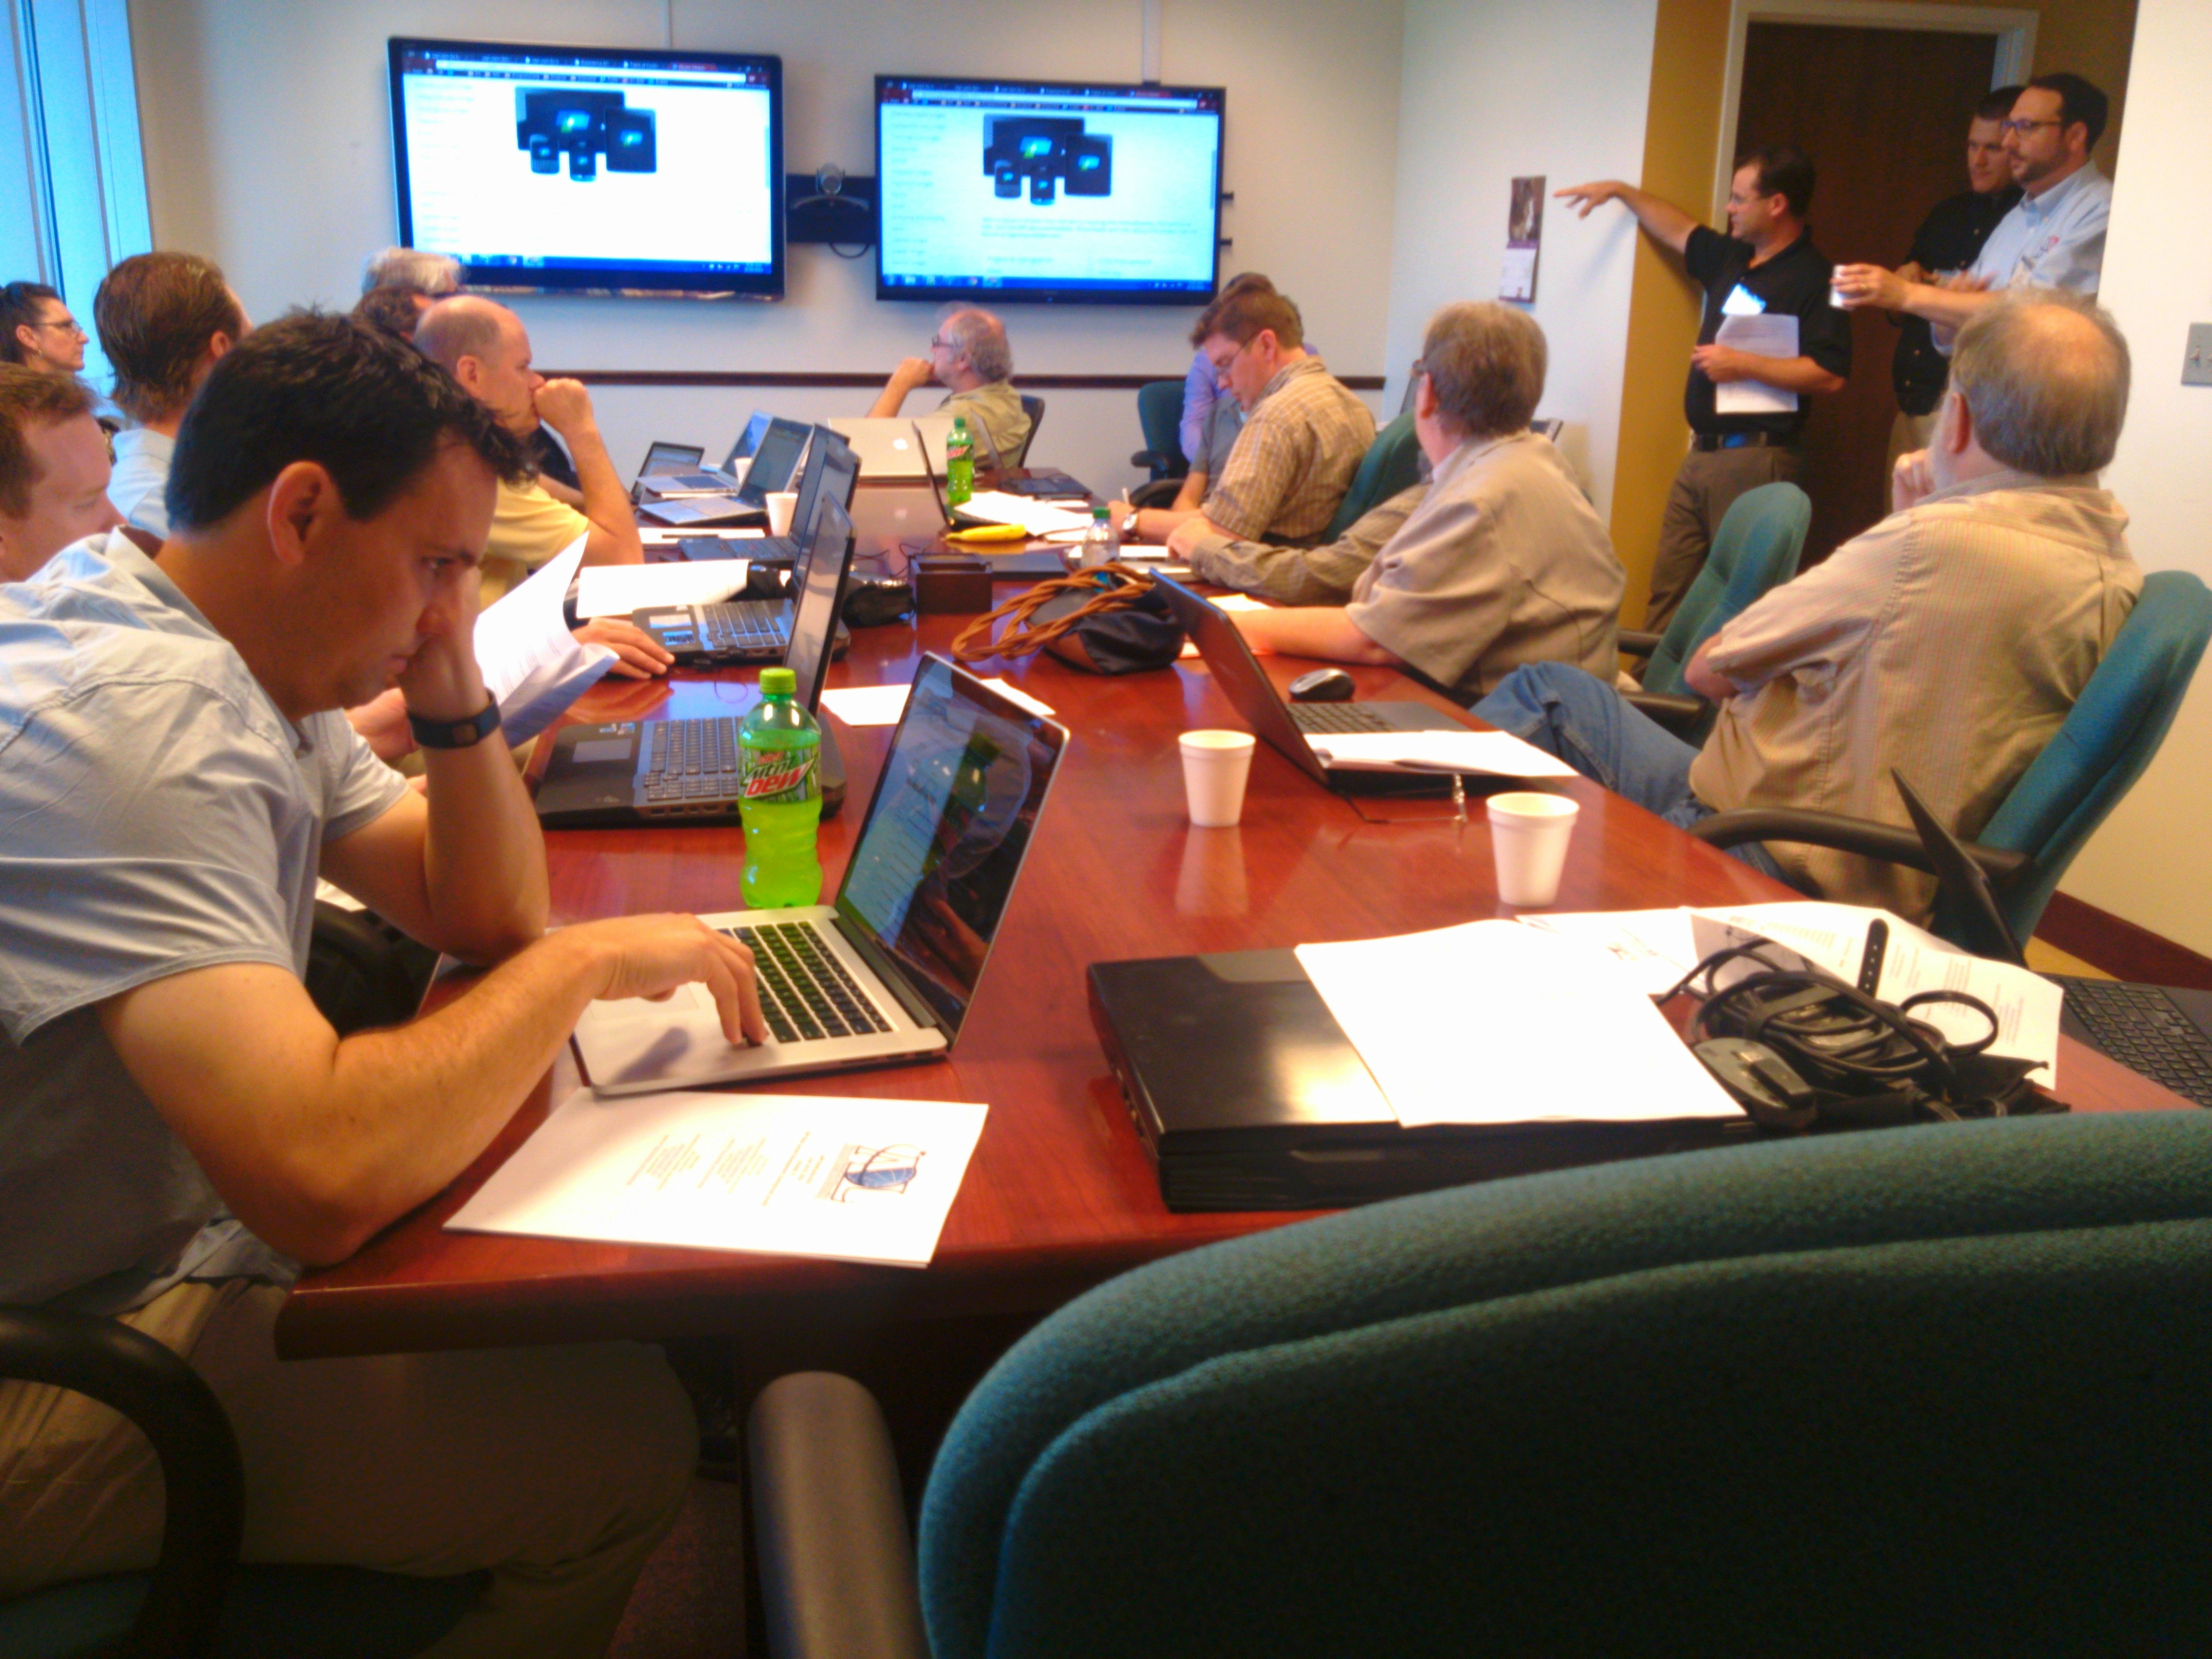 Concentrating on an xAPI Bootcamp Web Content Development session